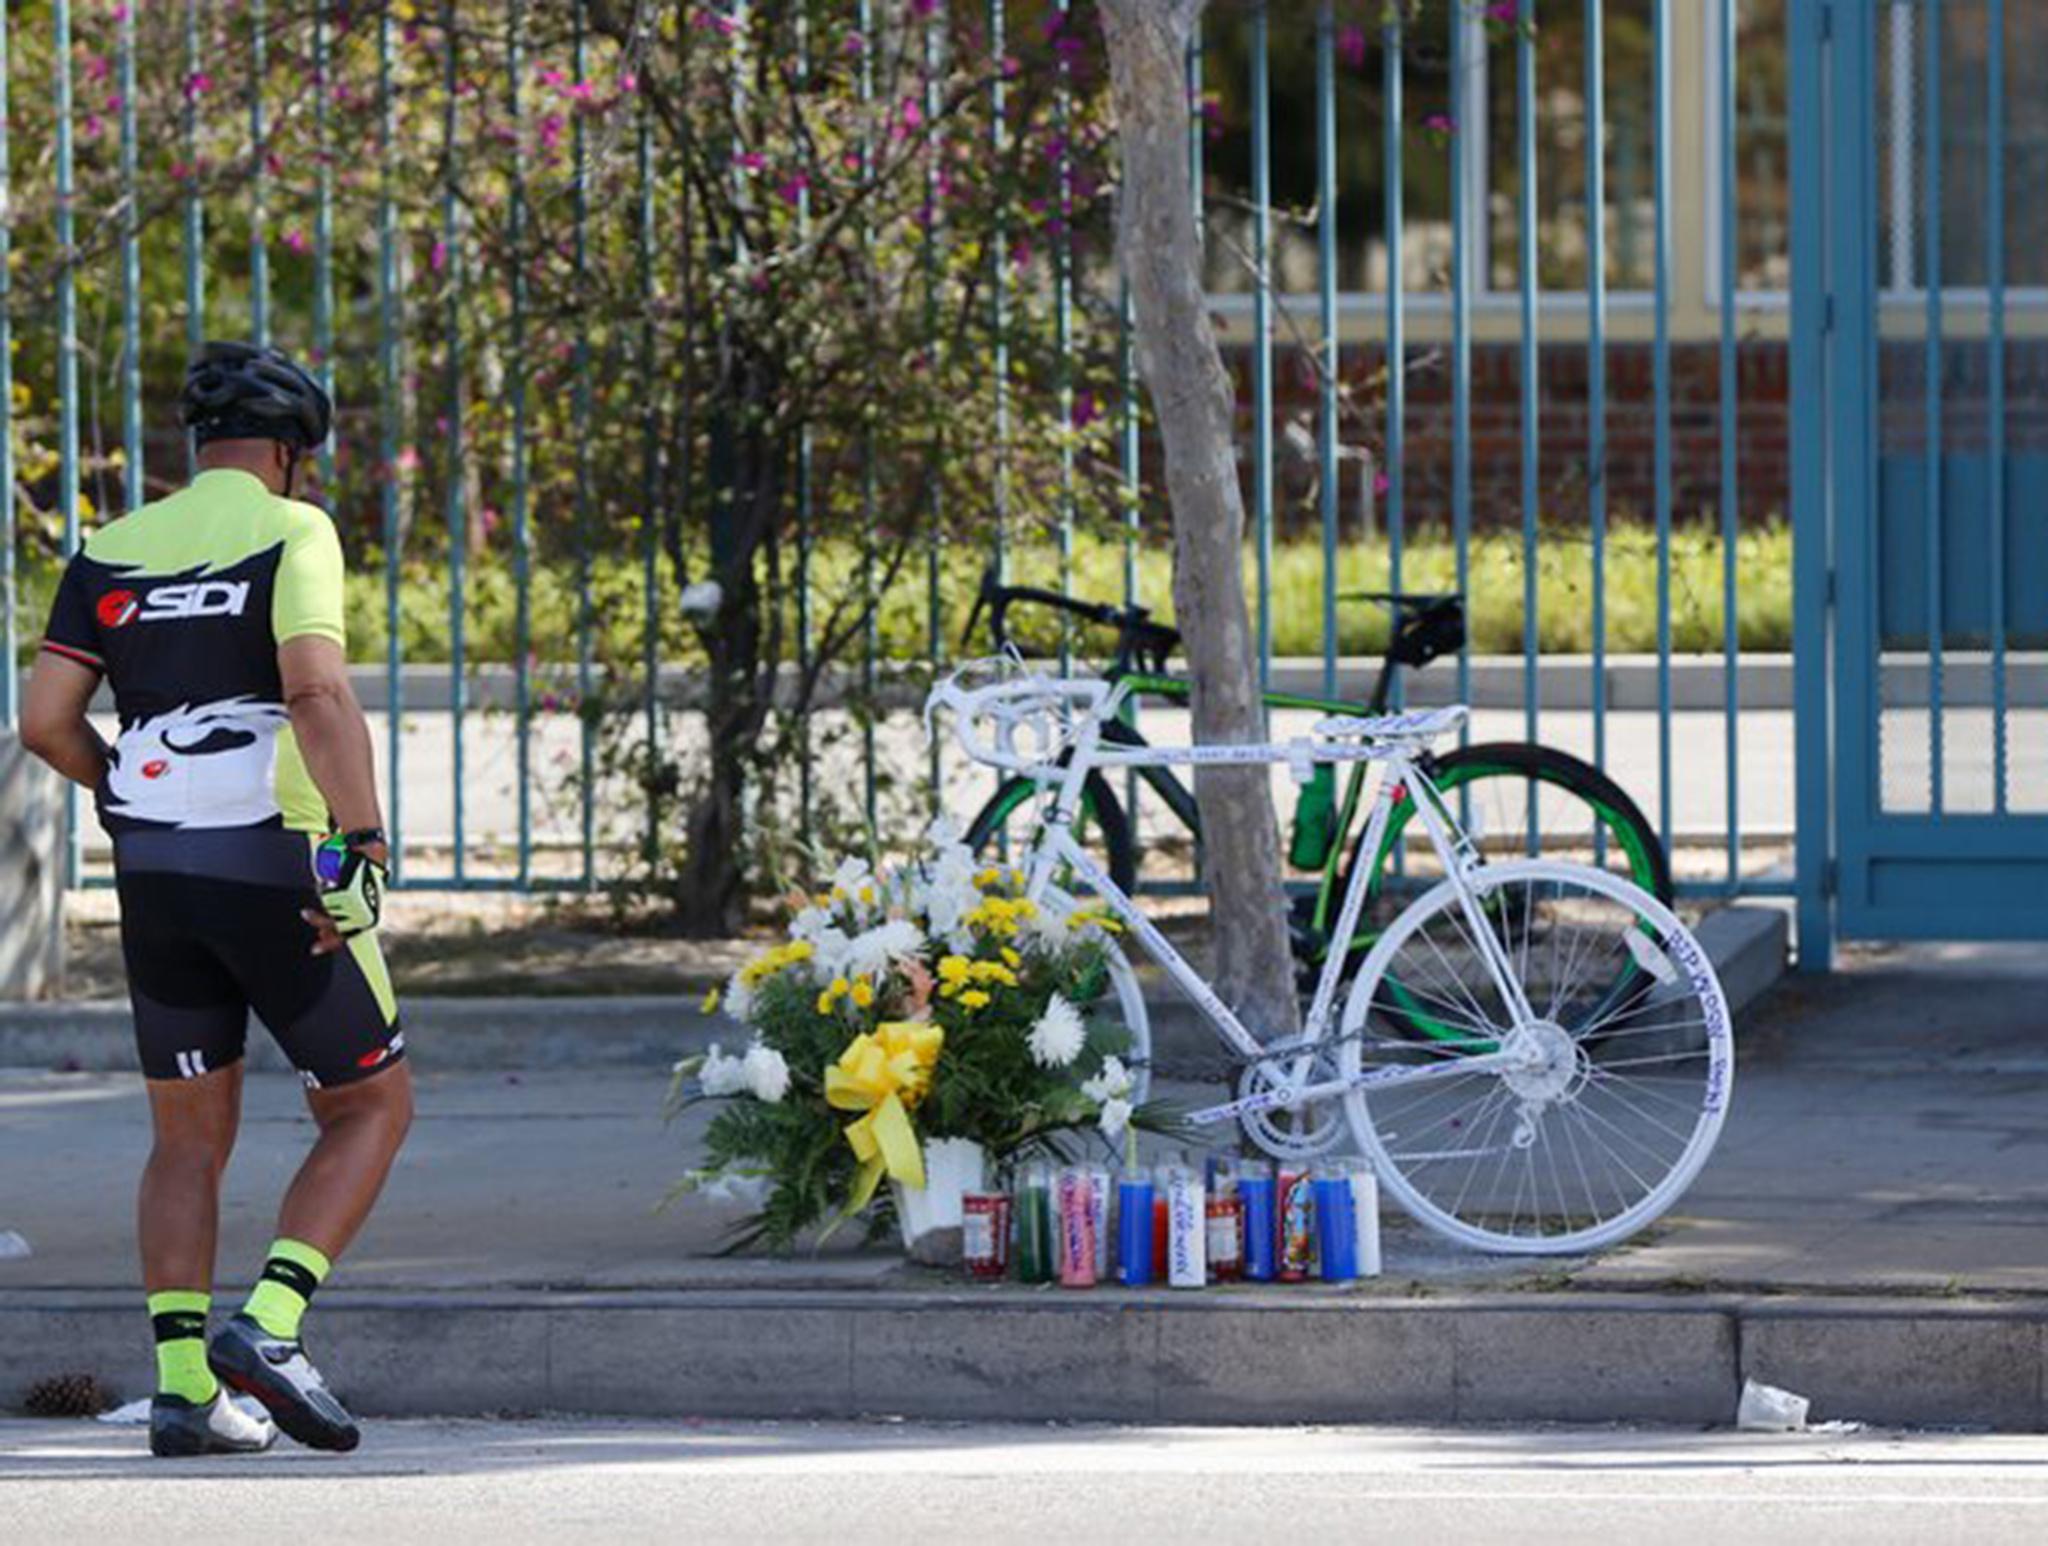 The memorial set up for Los Angeles hit-and-run victim Frederick Frazier